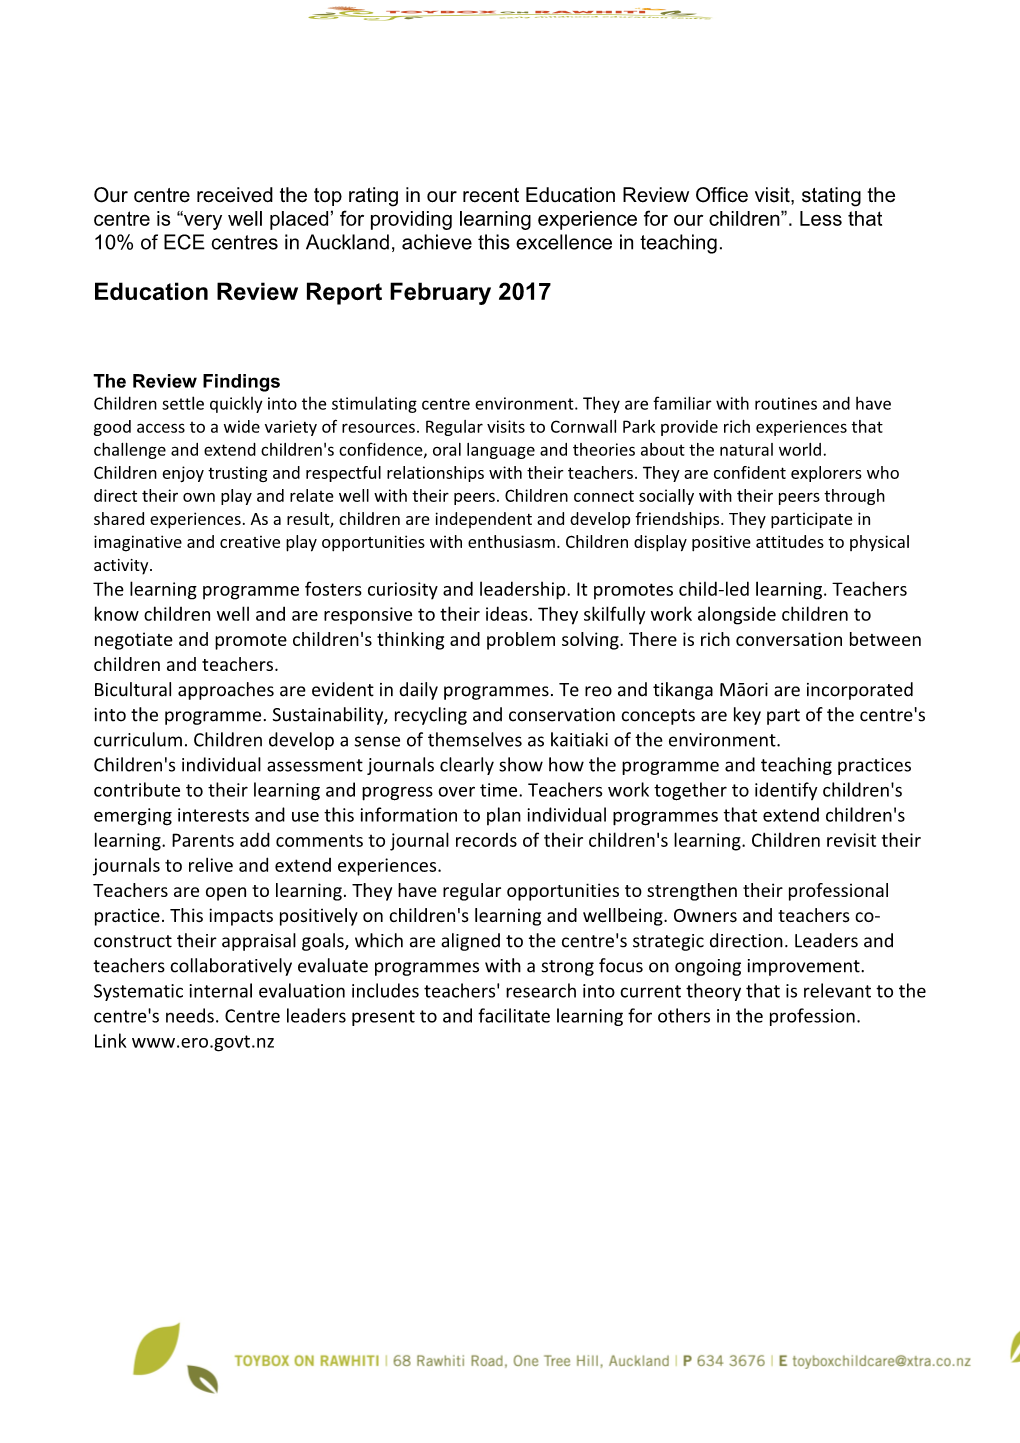 Education Review Report February 2017